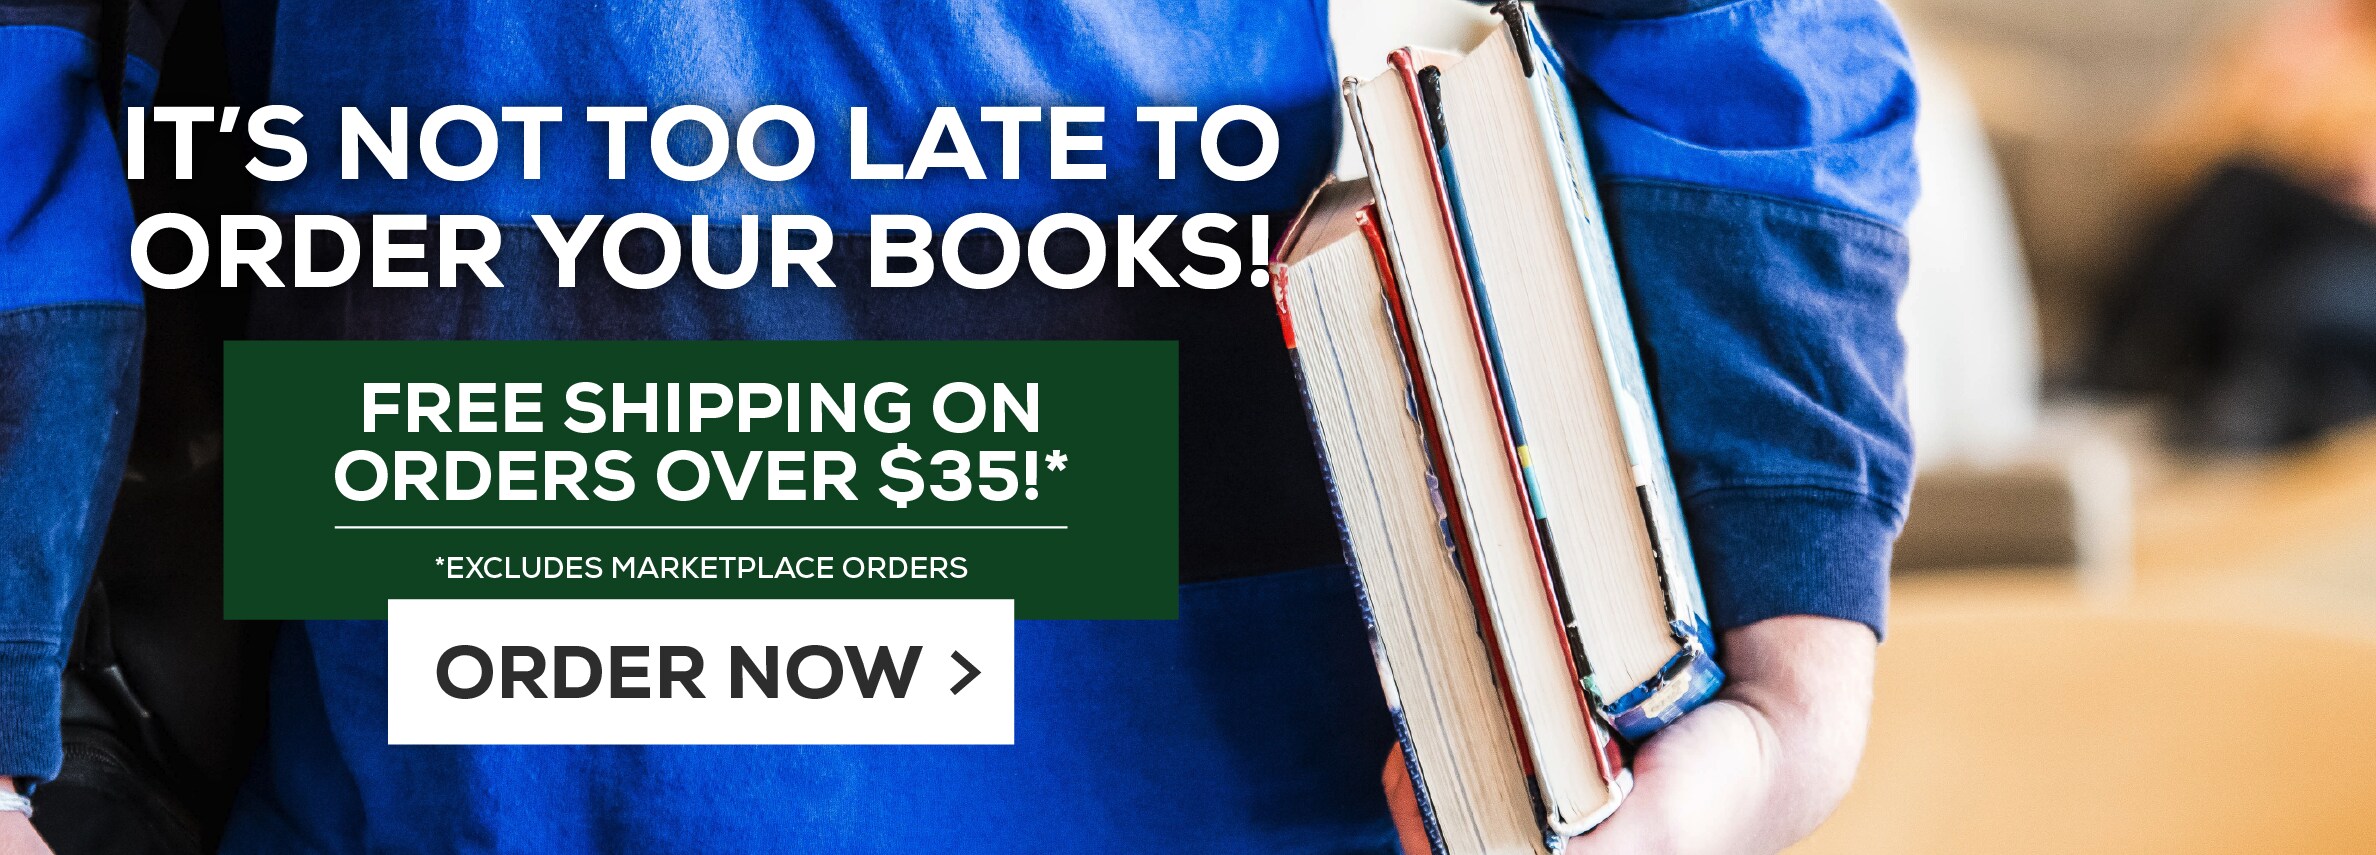 IT'S NOT TOO LATE TO ORDER YOUR BOOKS! Free Shipping on Orders Over $35* *EXCLUDES MARKETPLACE ORDERS ORDER NOW